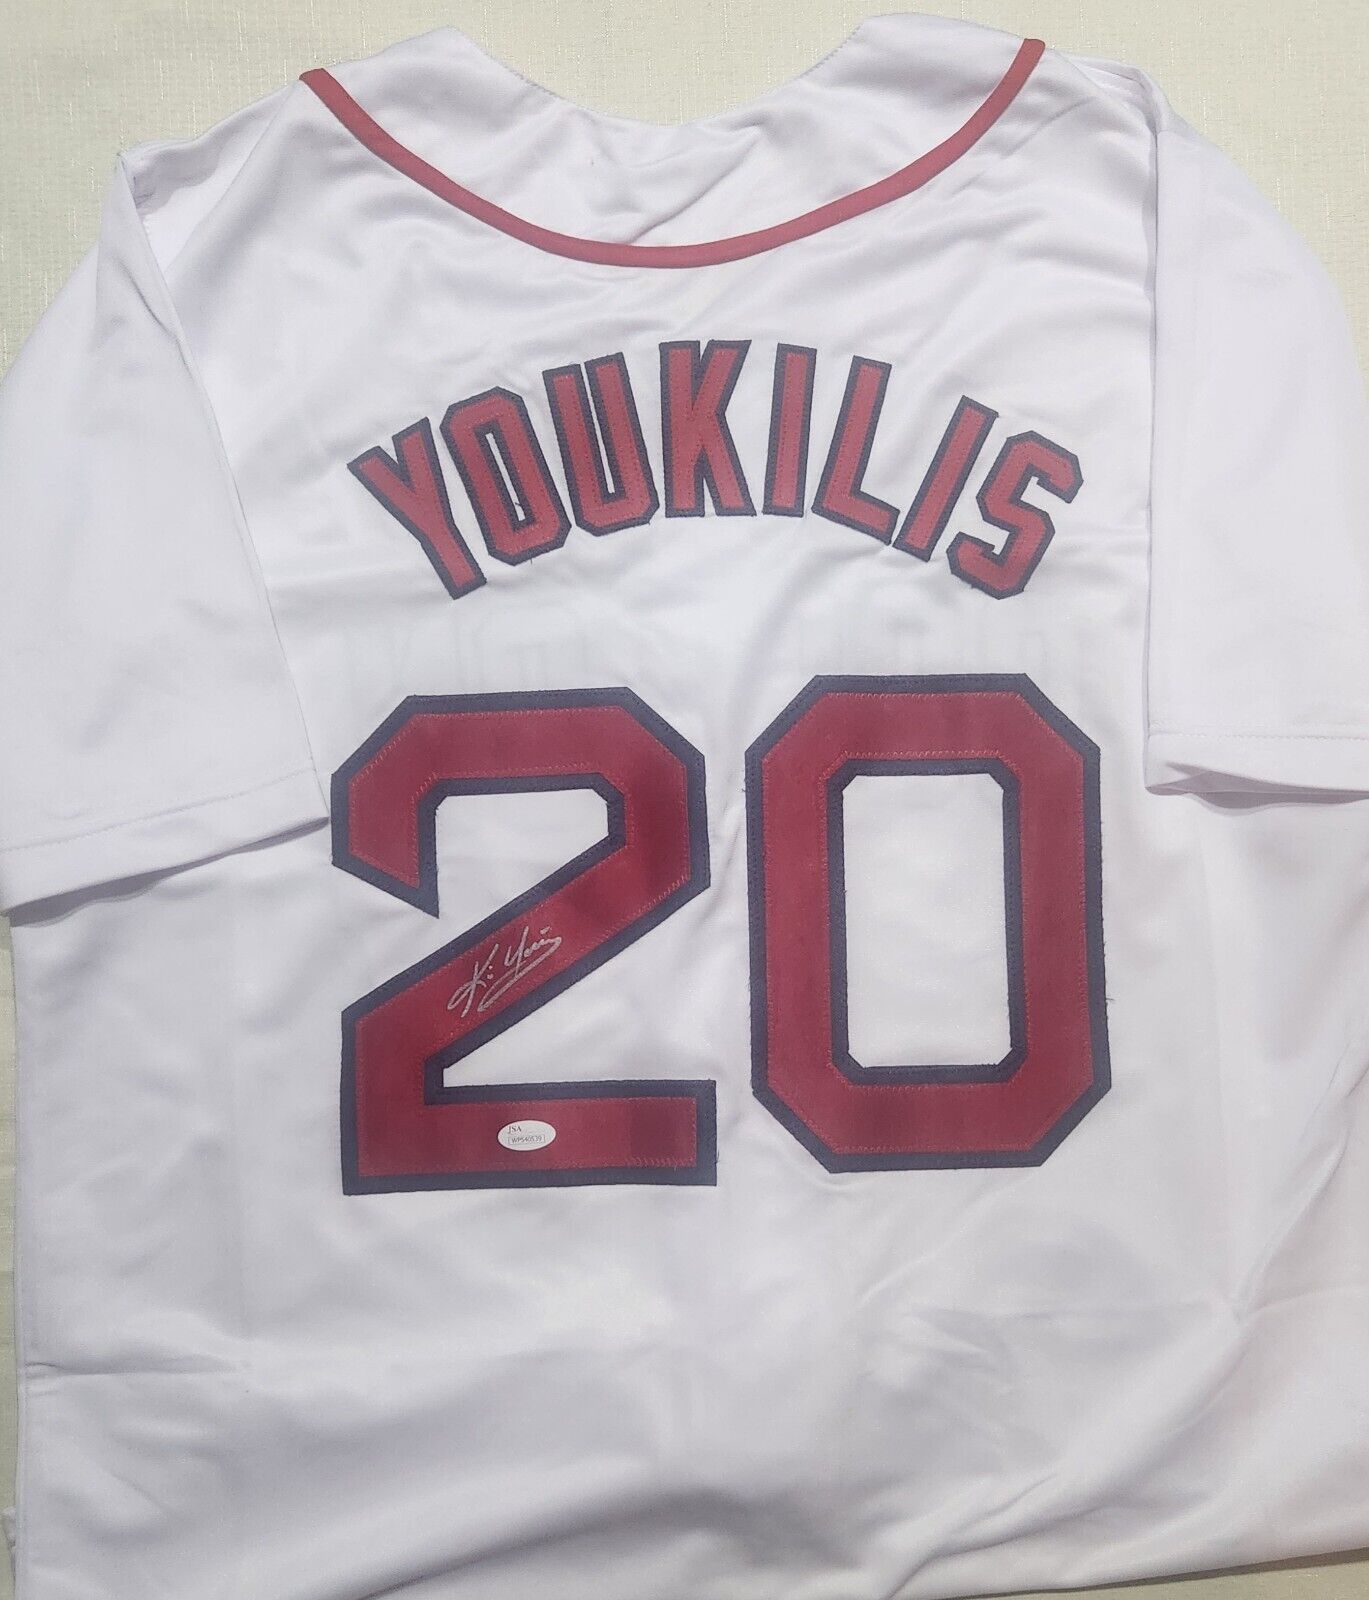 Kevin Youkilis signed Custom Jersey auto autograph certified size XL 